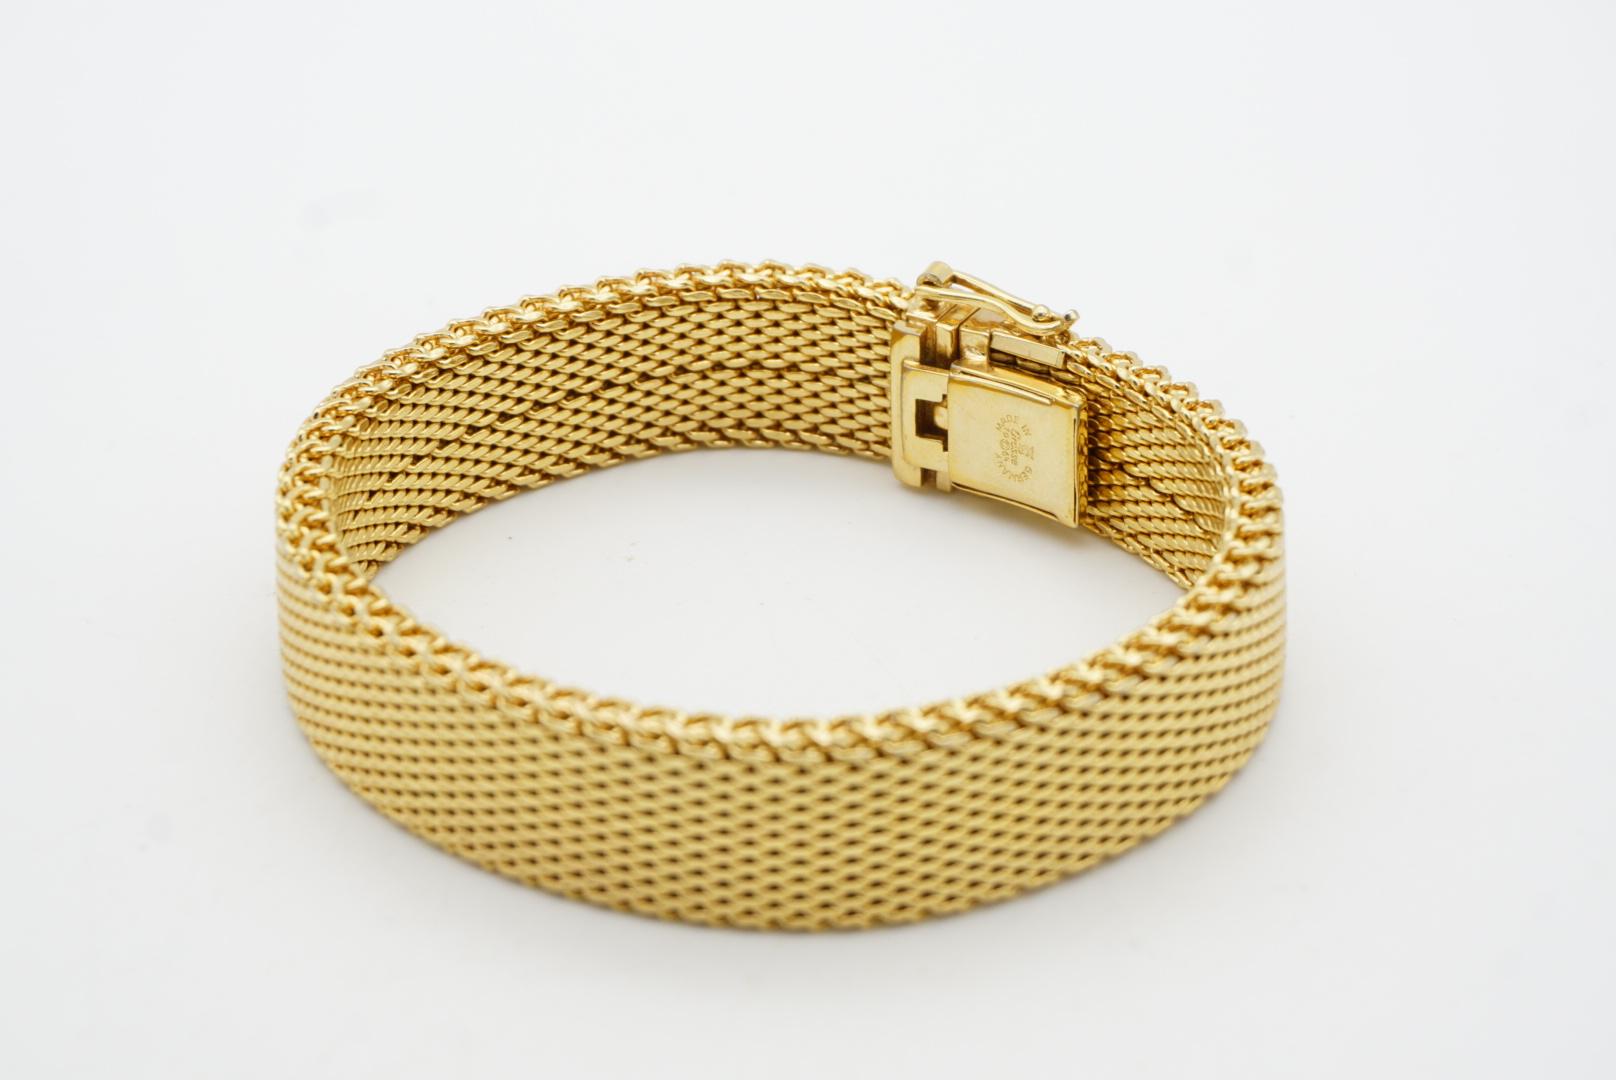 Christian Dior GROSSE 1964 Double Thick Woven Mesh Modernist Gold Cuff Bracelet For Sale 4